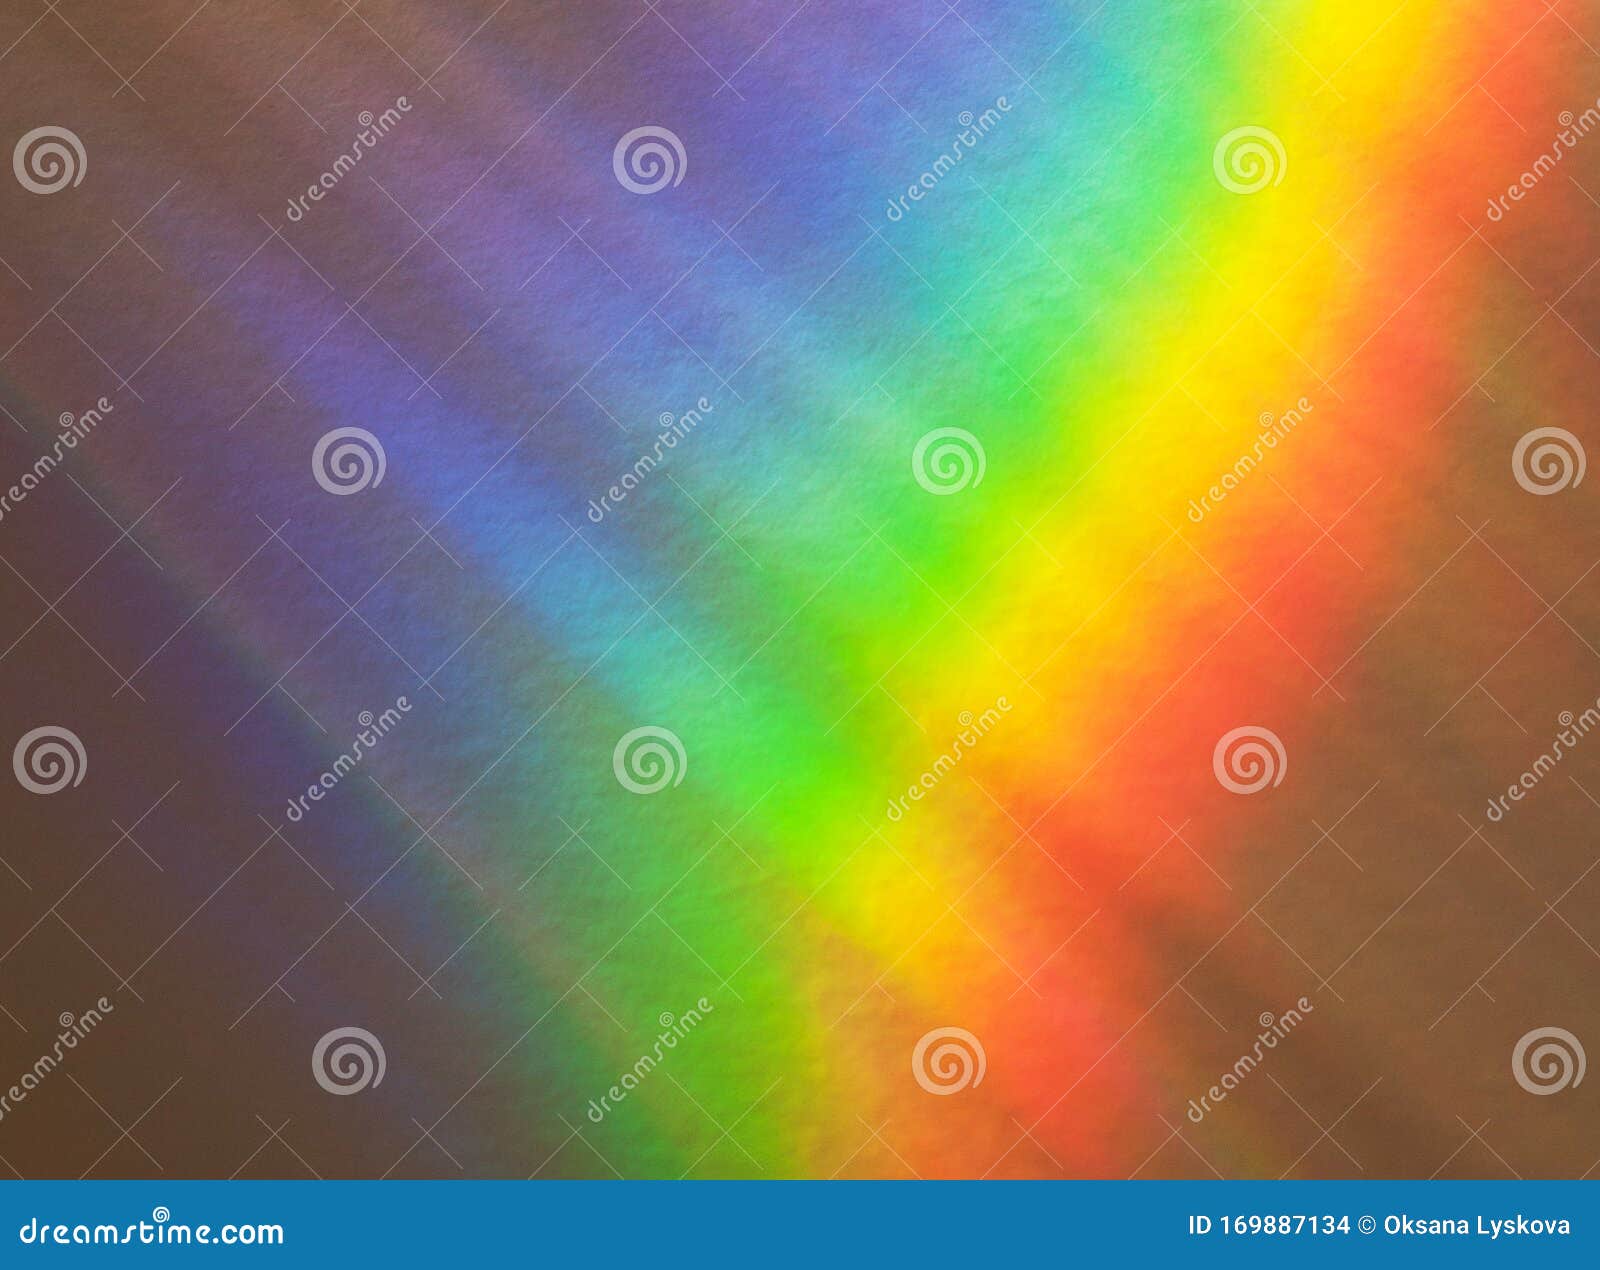 light refraction background image. rainbow blur reflection on stucco wall